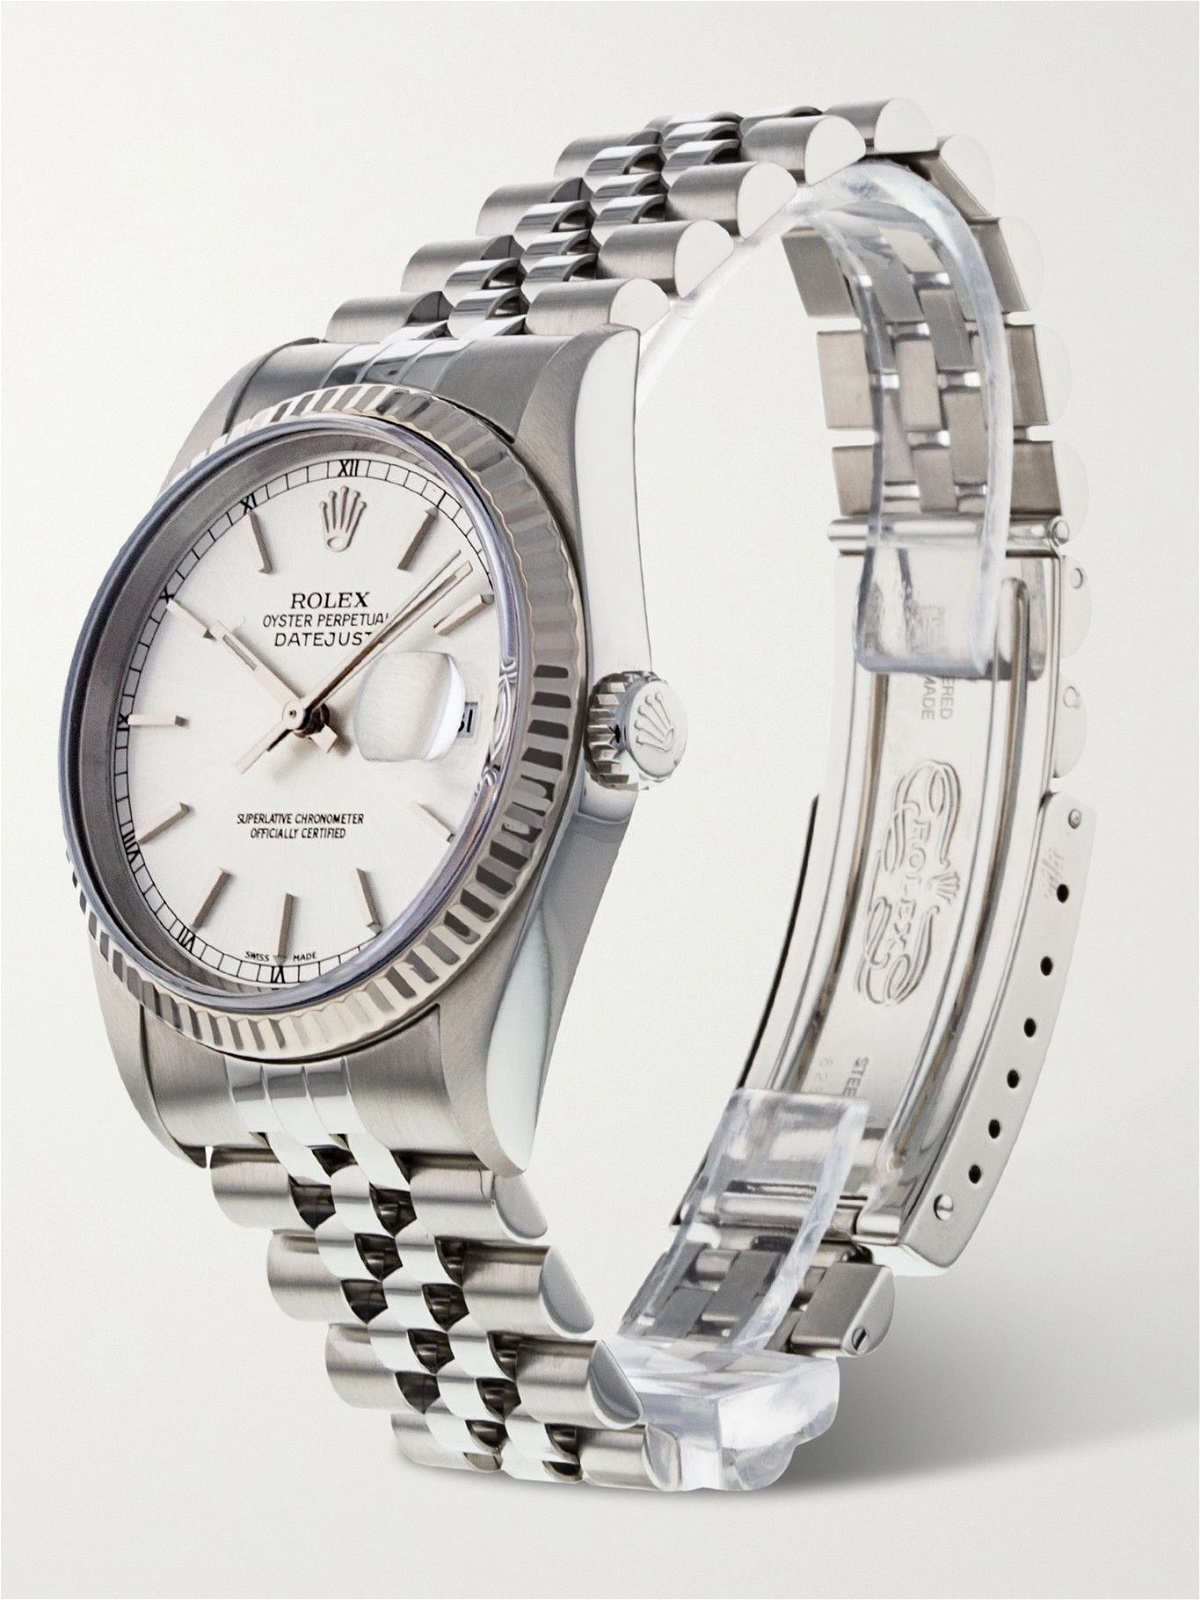 ROLEX - Pre-Owned 2001 Datejust Automatic 36mm Oystersteel and 18-Karat White Gold Watch, Ref. No. 189331